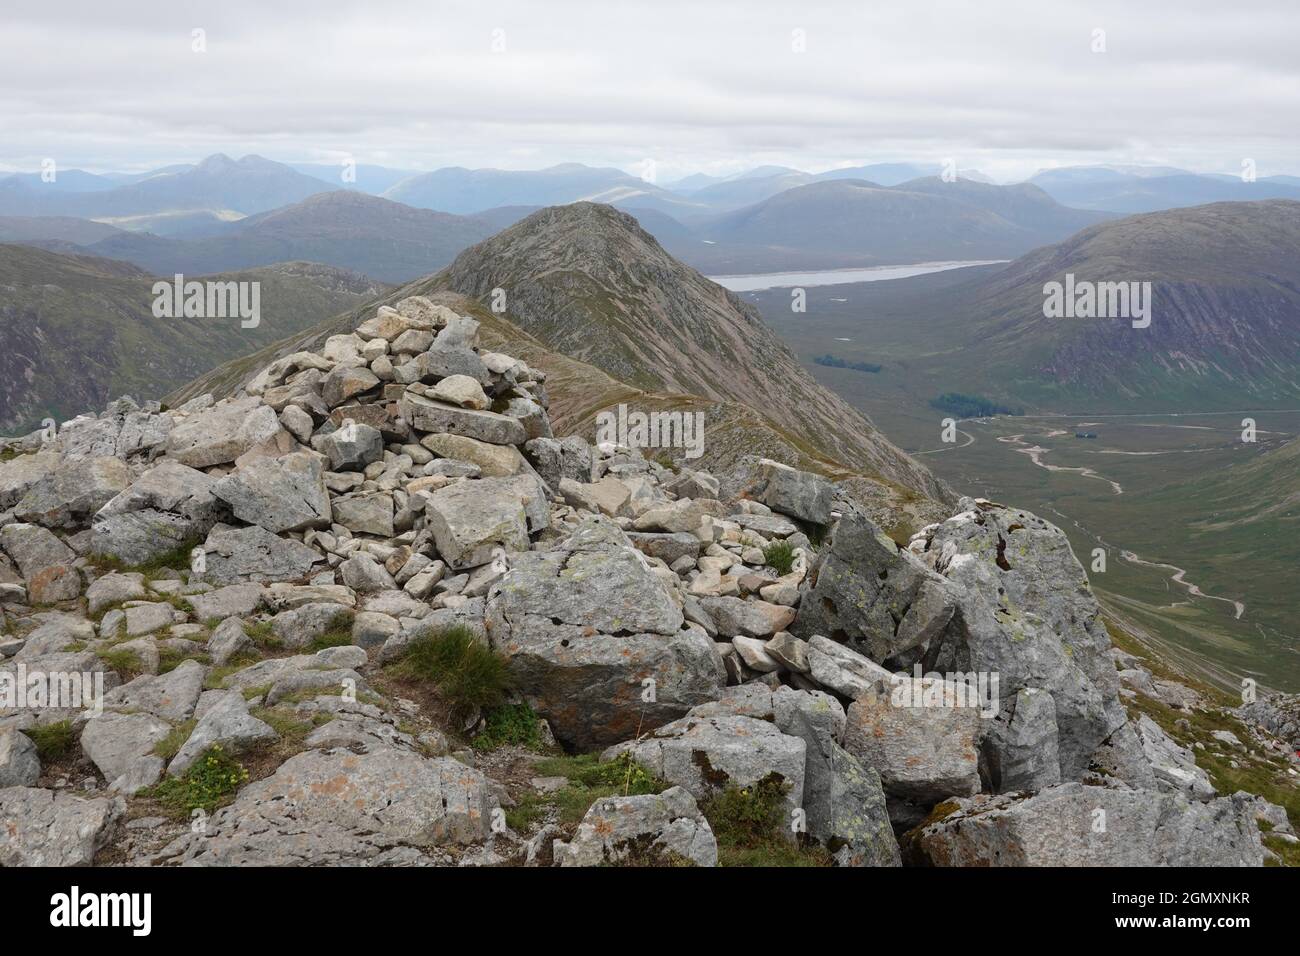 View from summit of Munro, Stob Dubh, Buachaille Etive Beag looking towards Loch Etive in distance, Glen Coe, Scottish Highlands Stock Photo